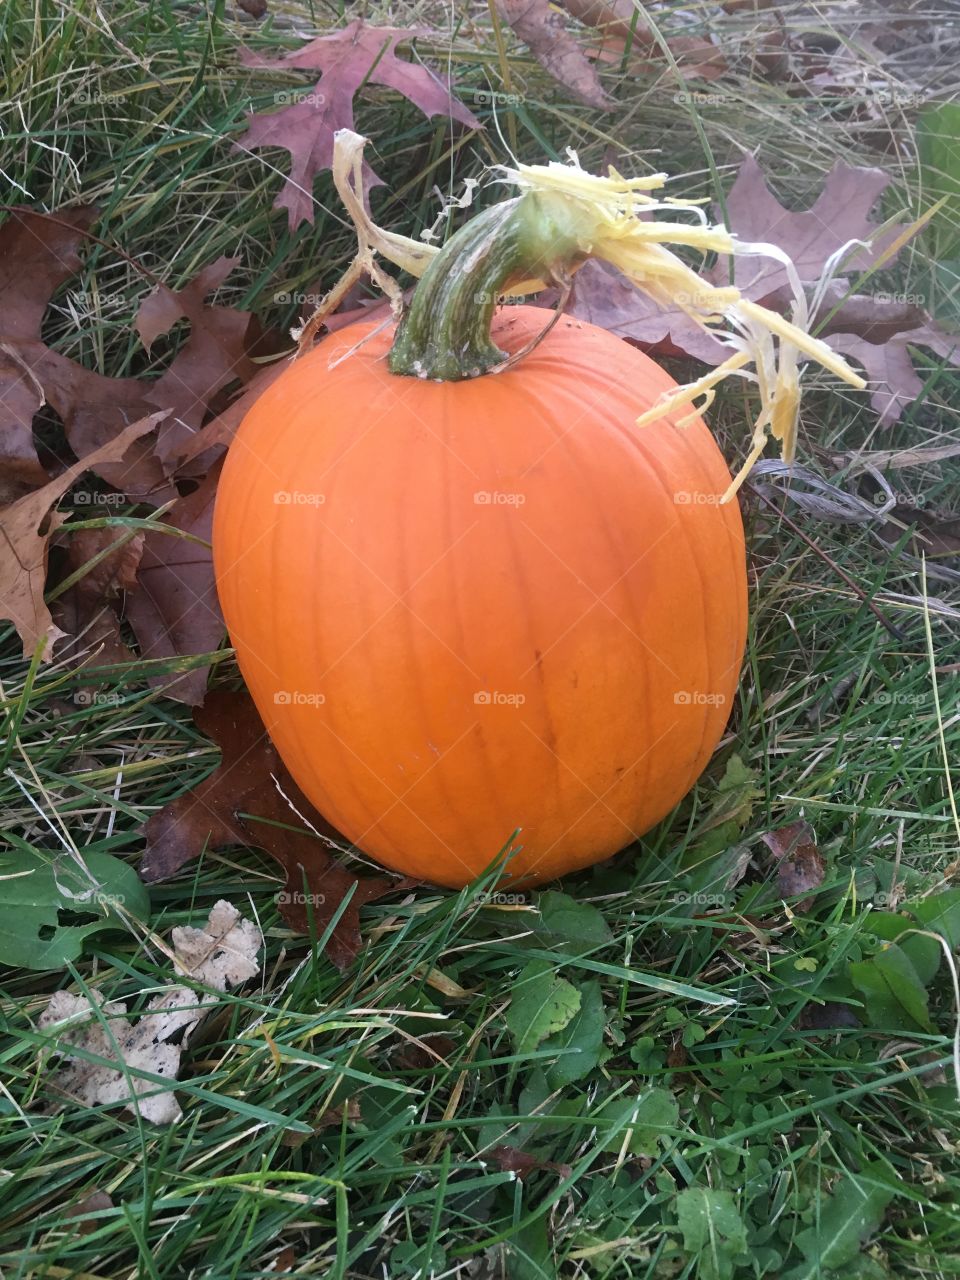 Fall Pumpkin from the Patch